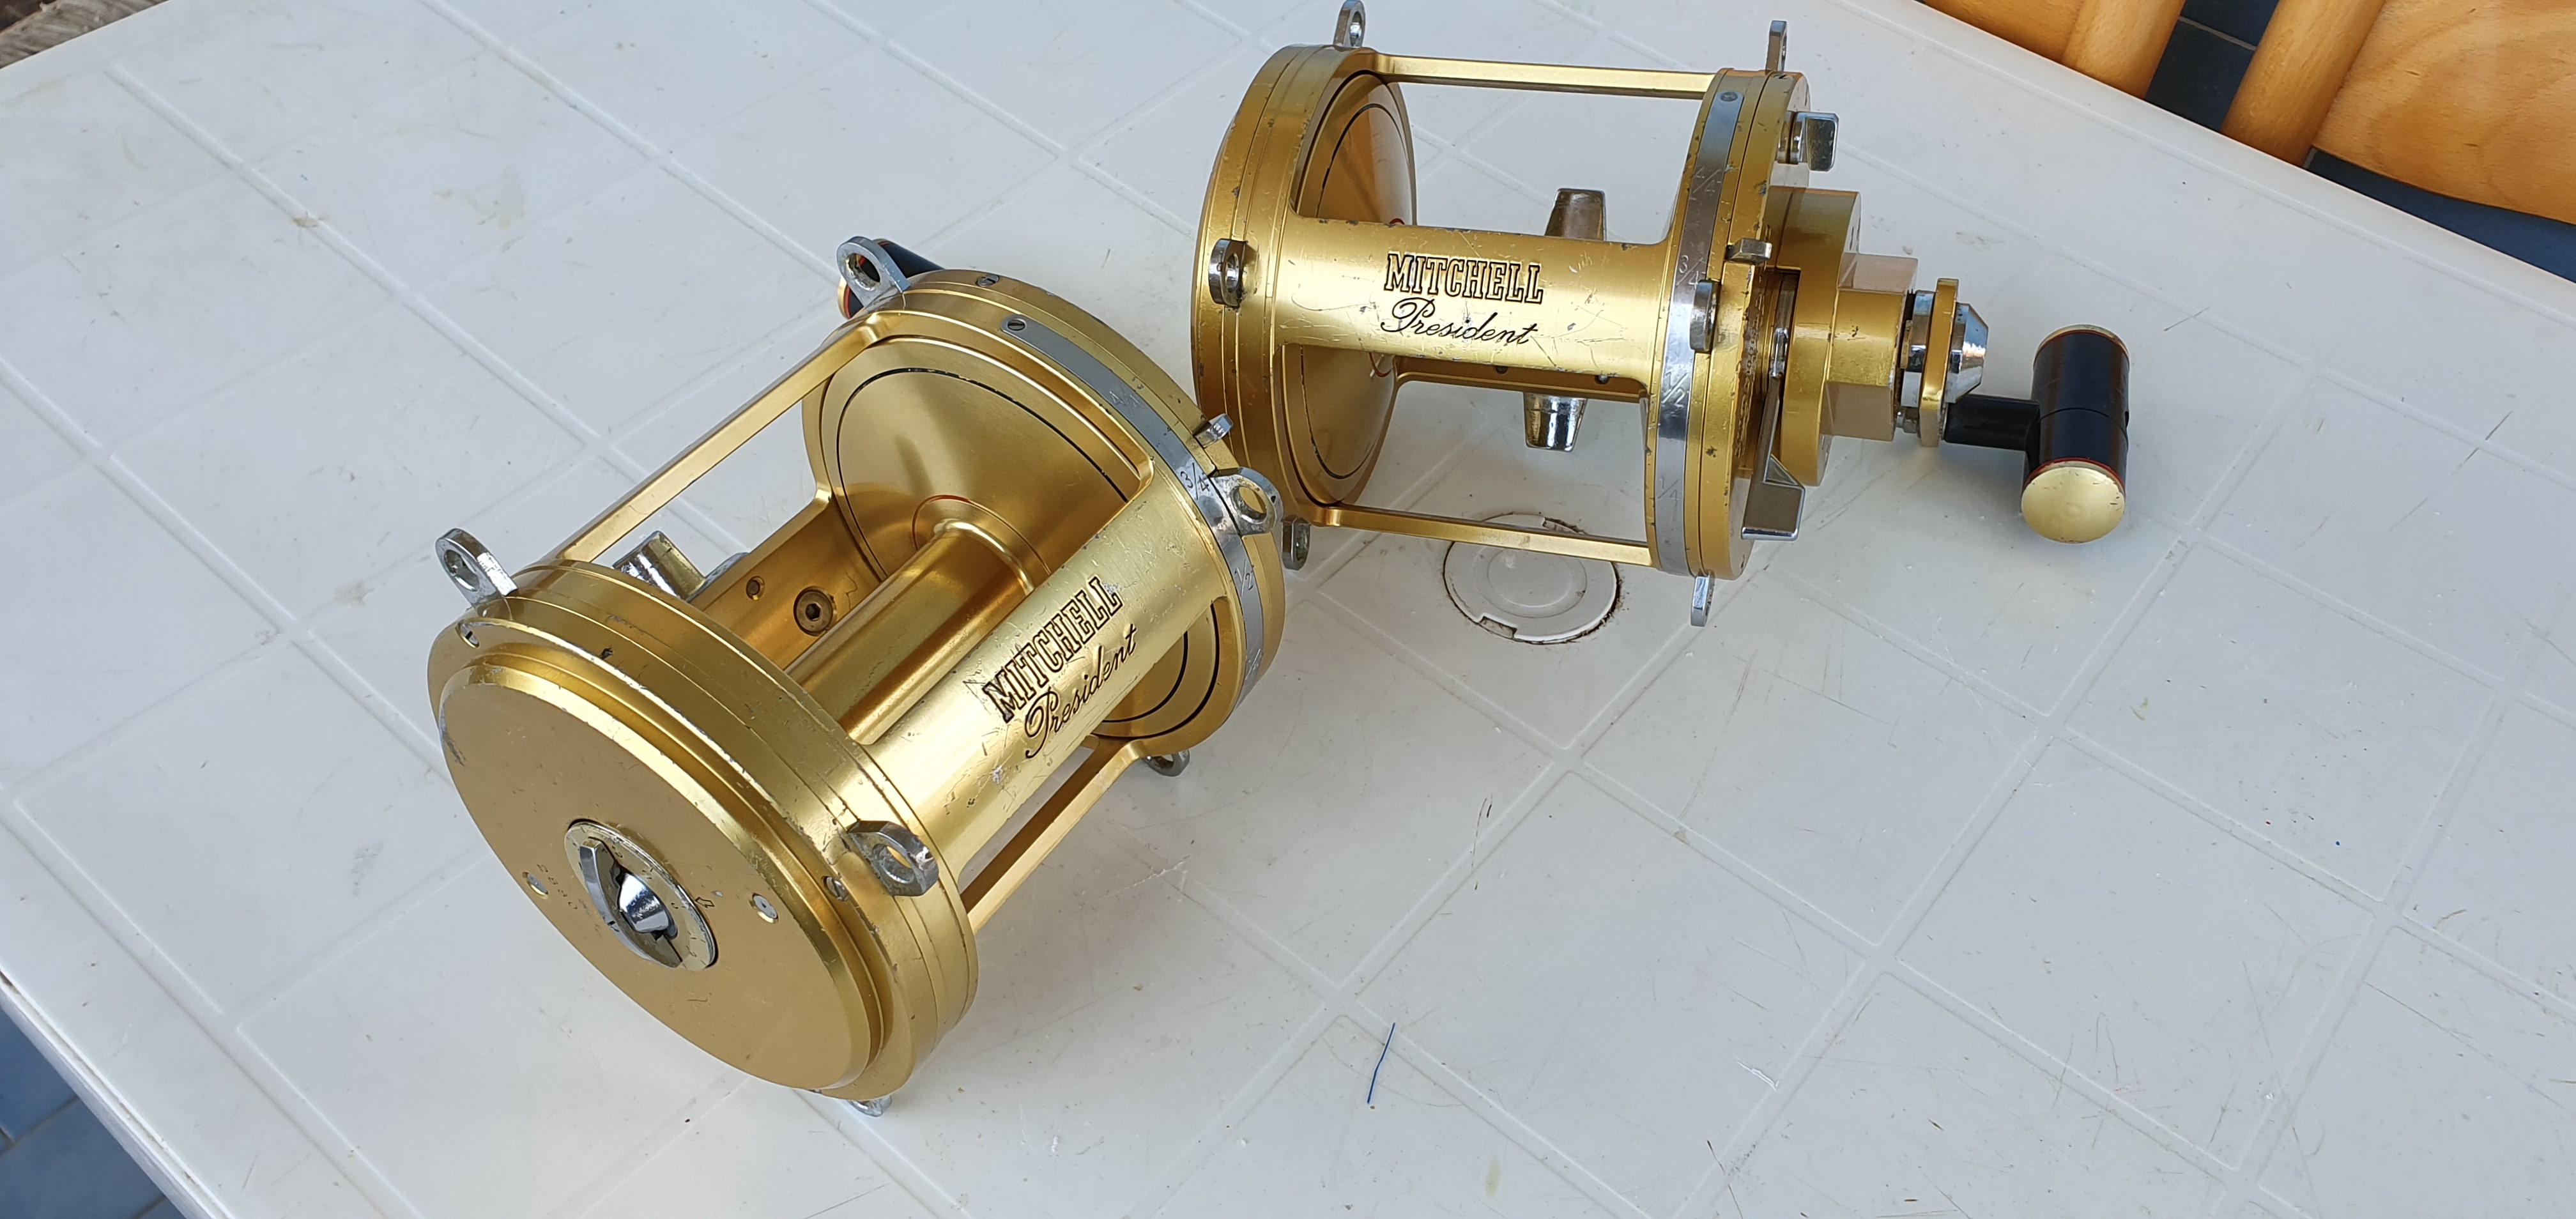 Mitchell 12/0 and 6/0 for sale,, - Reel Talk - ORCA